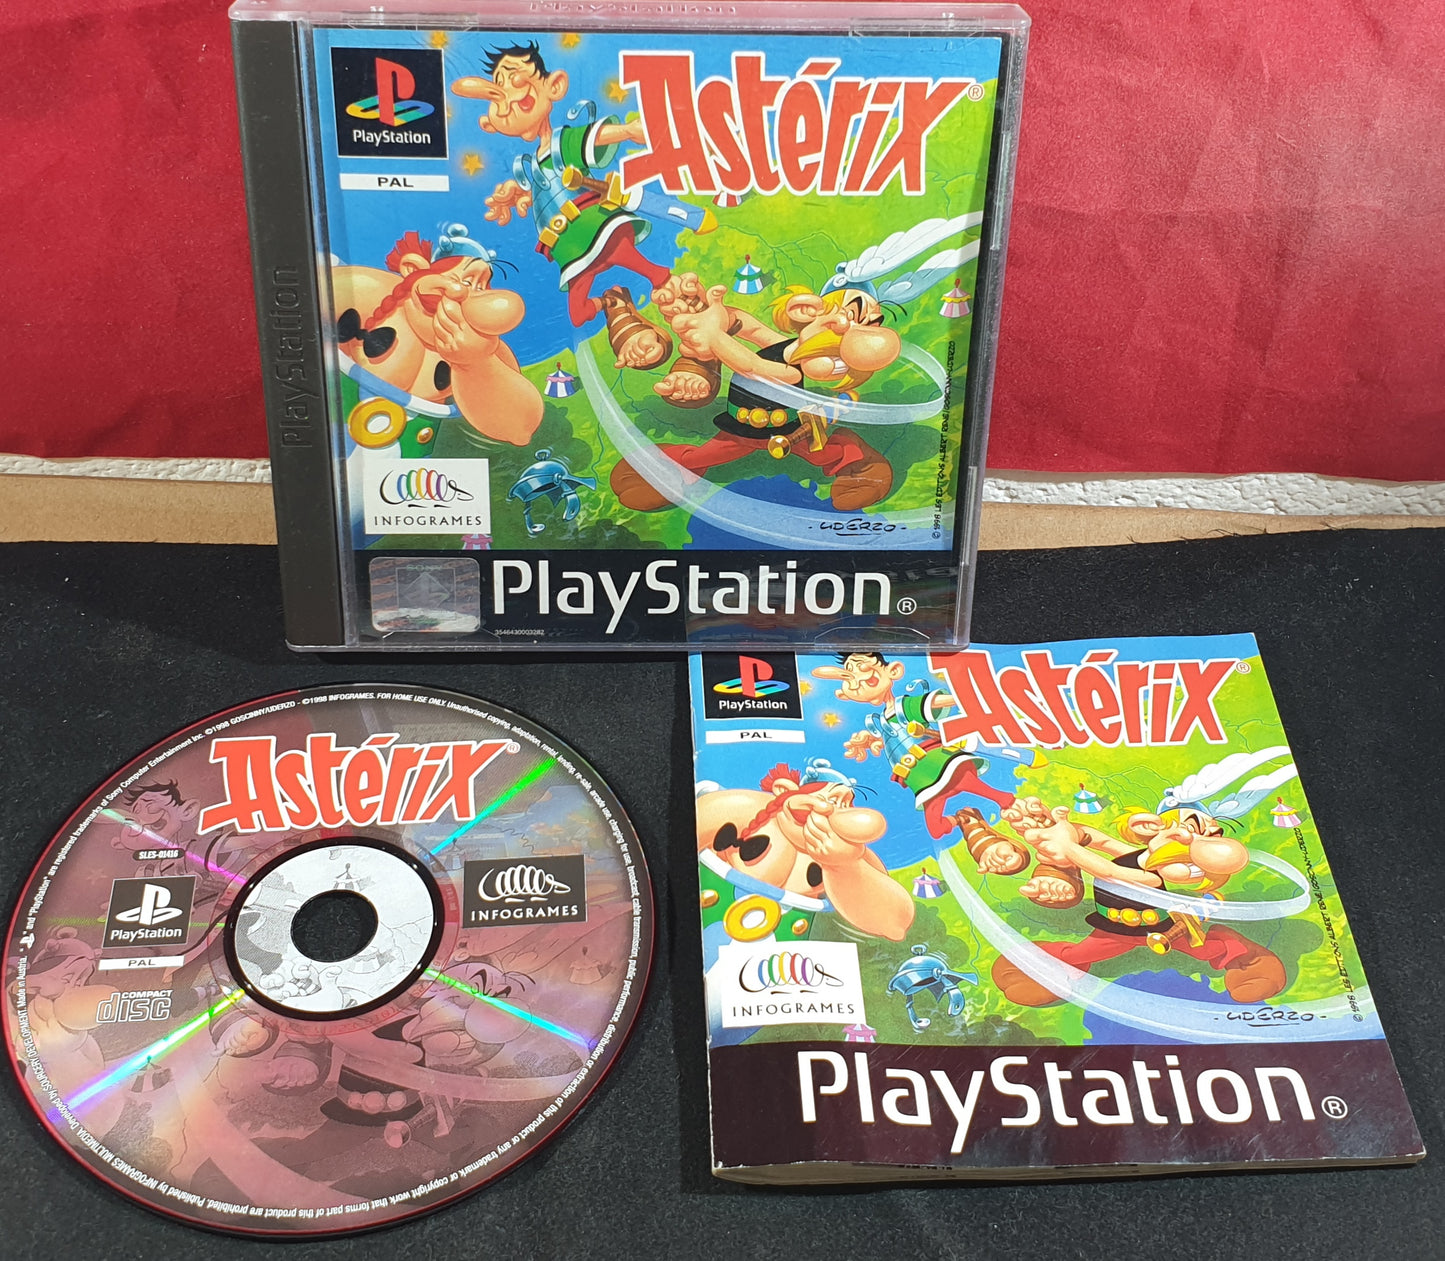 Asterix Sony Playstation 1 (PS1) Game